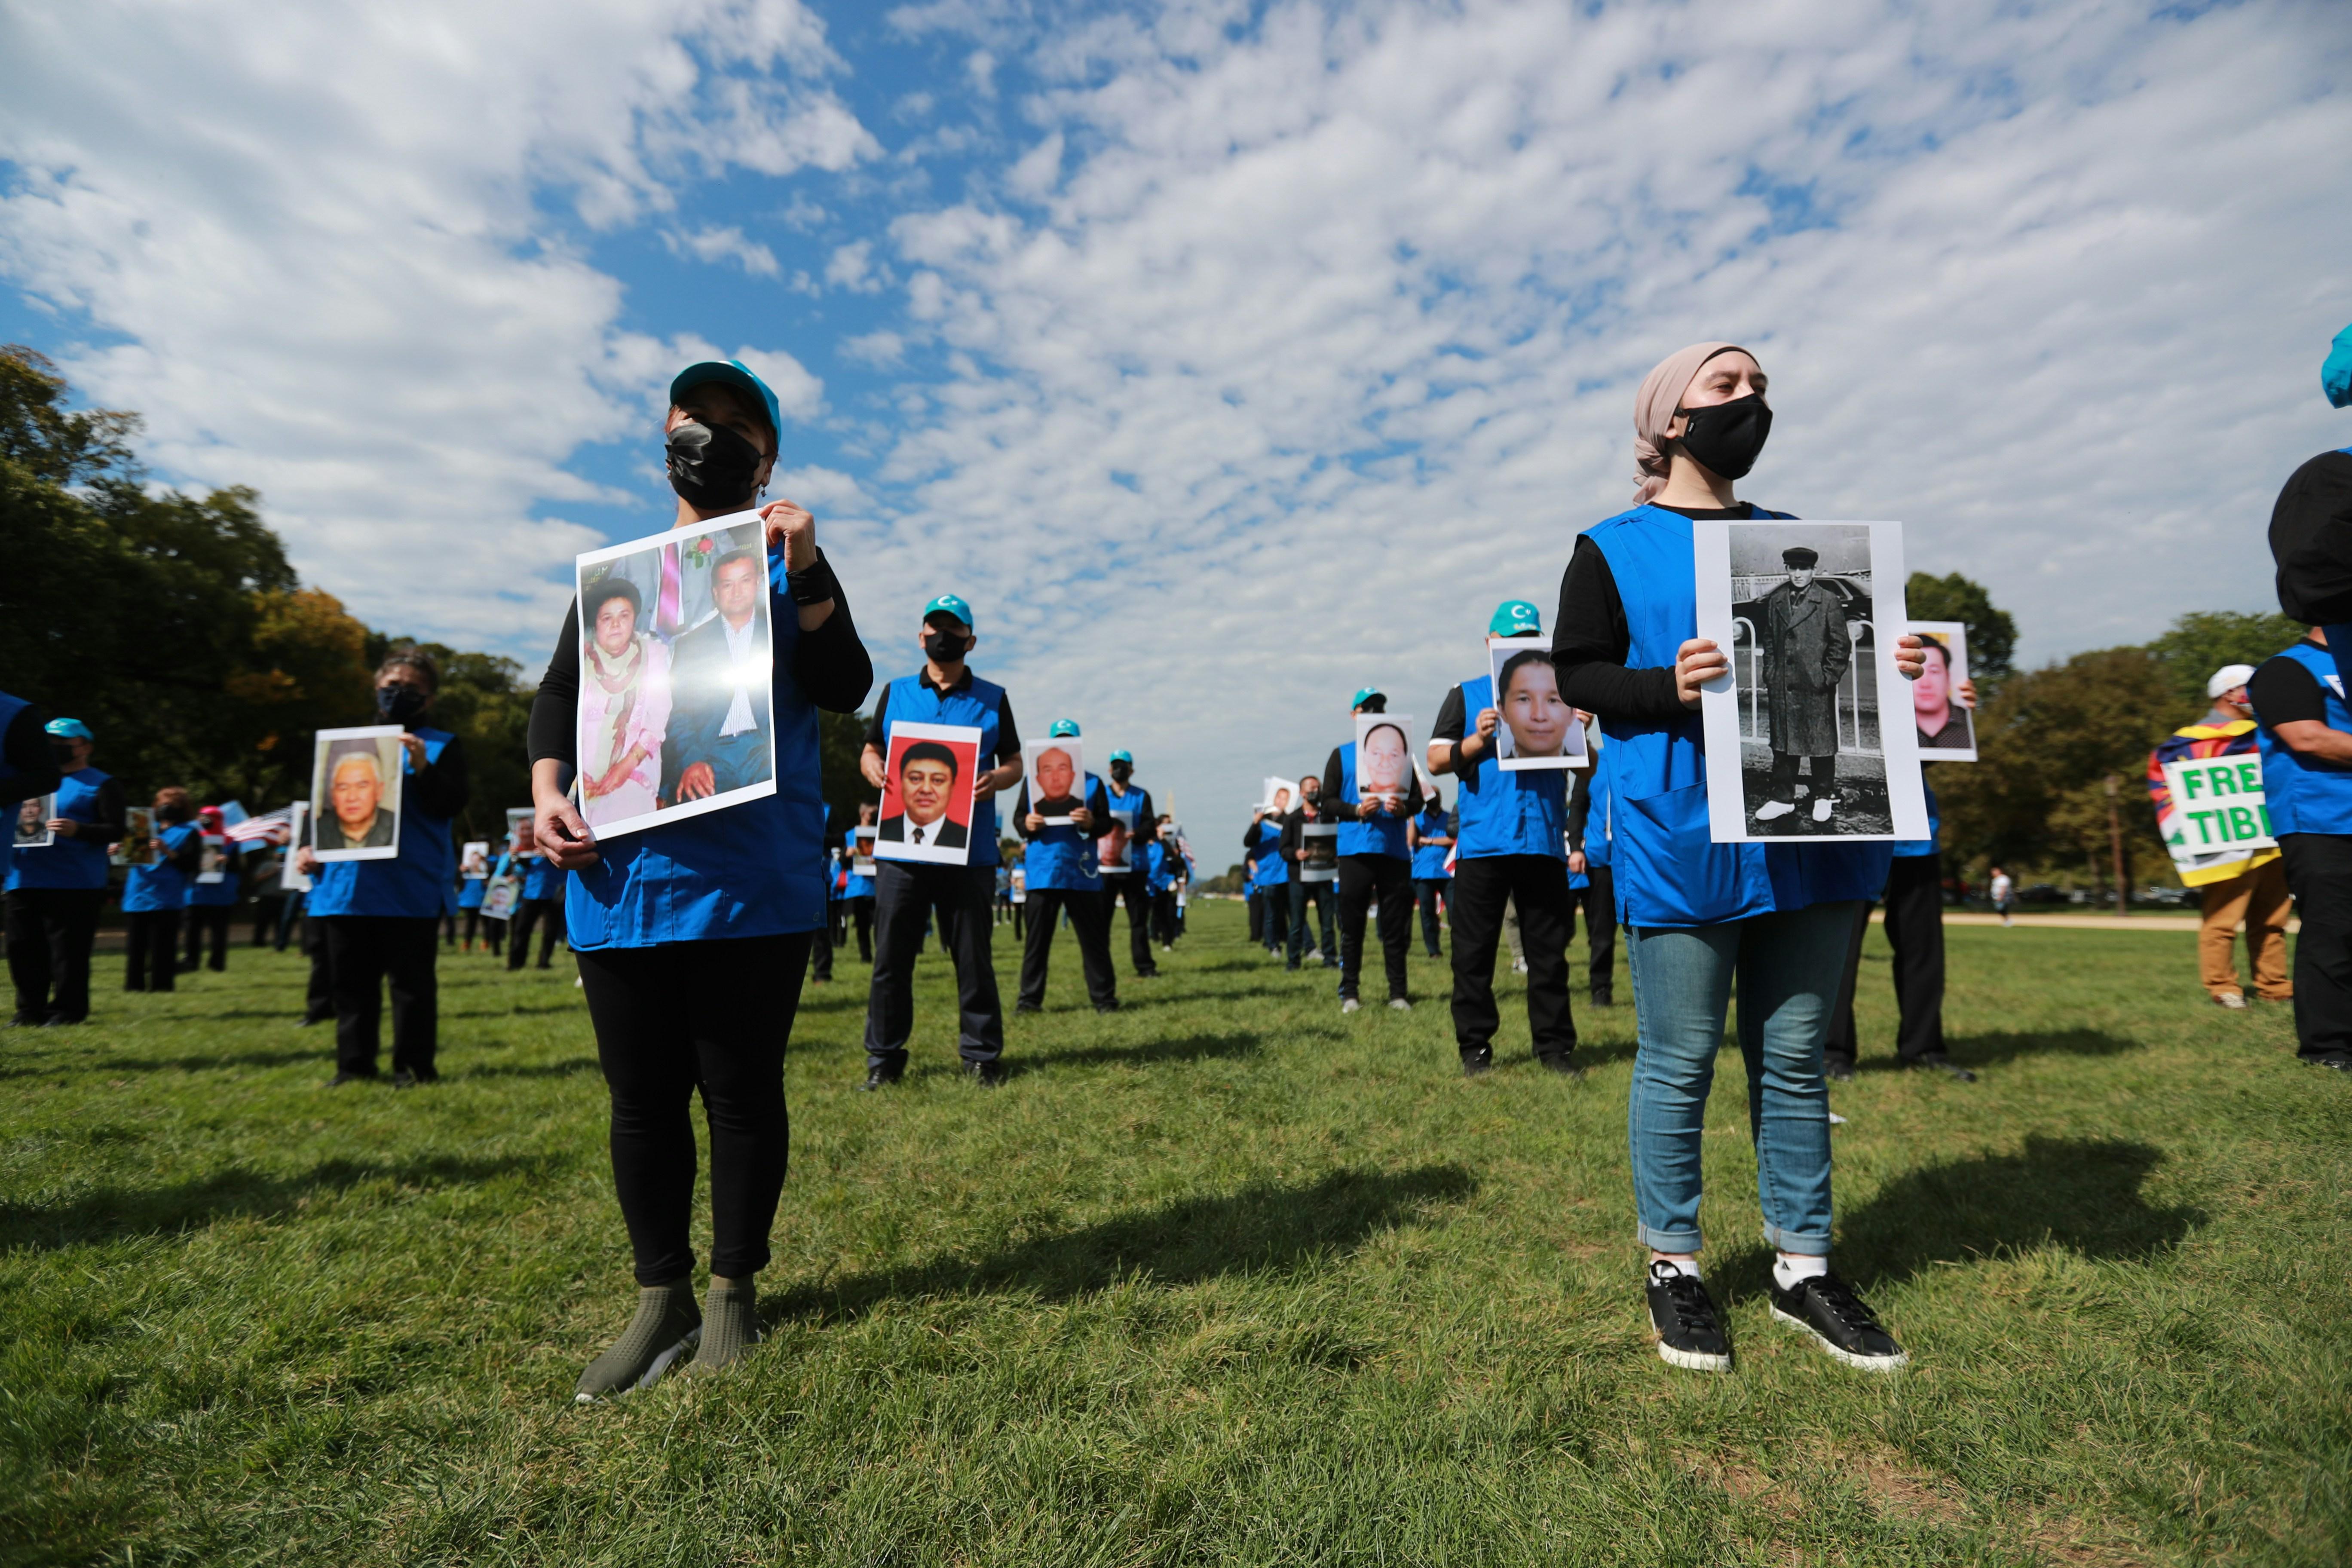 People standing on a field in blue clothing protesting the Uyghur genocide